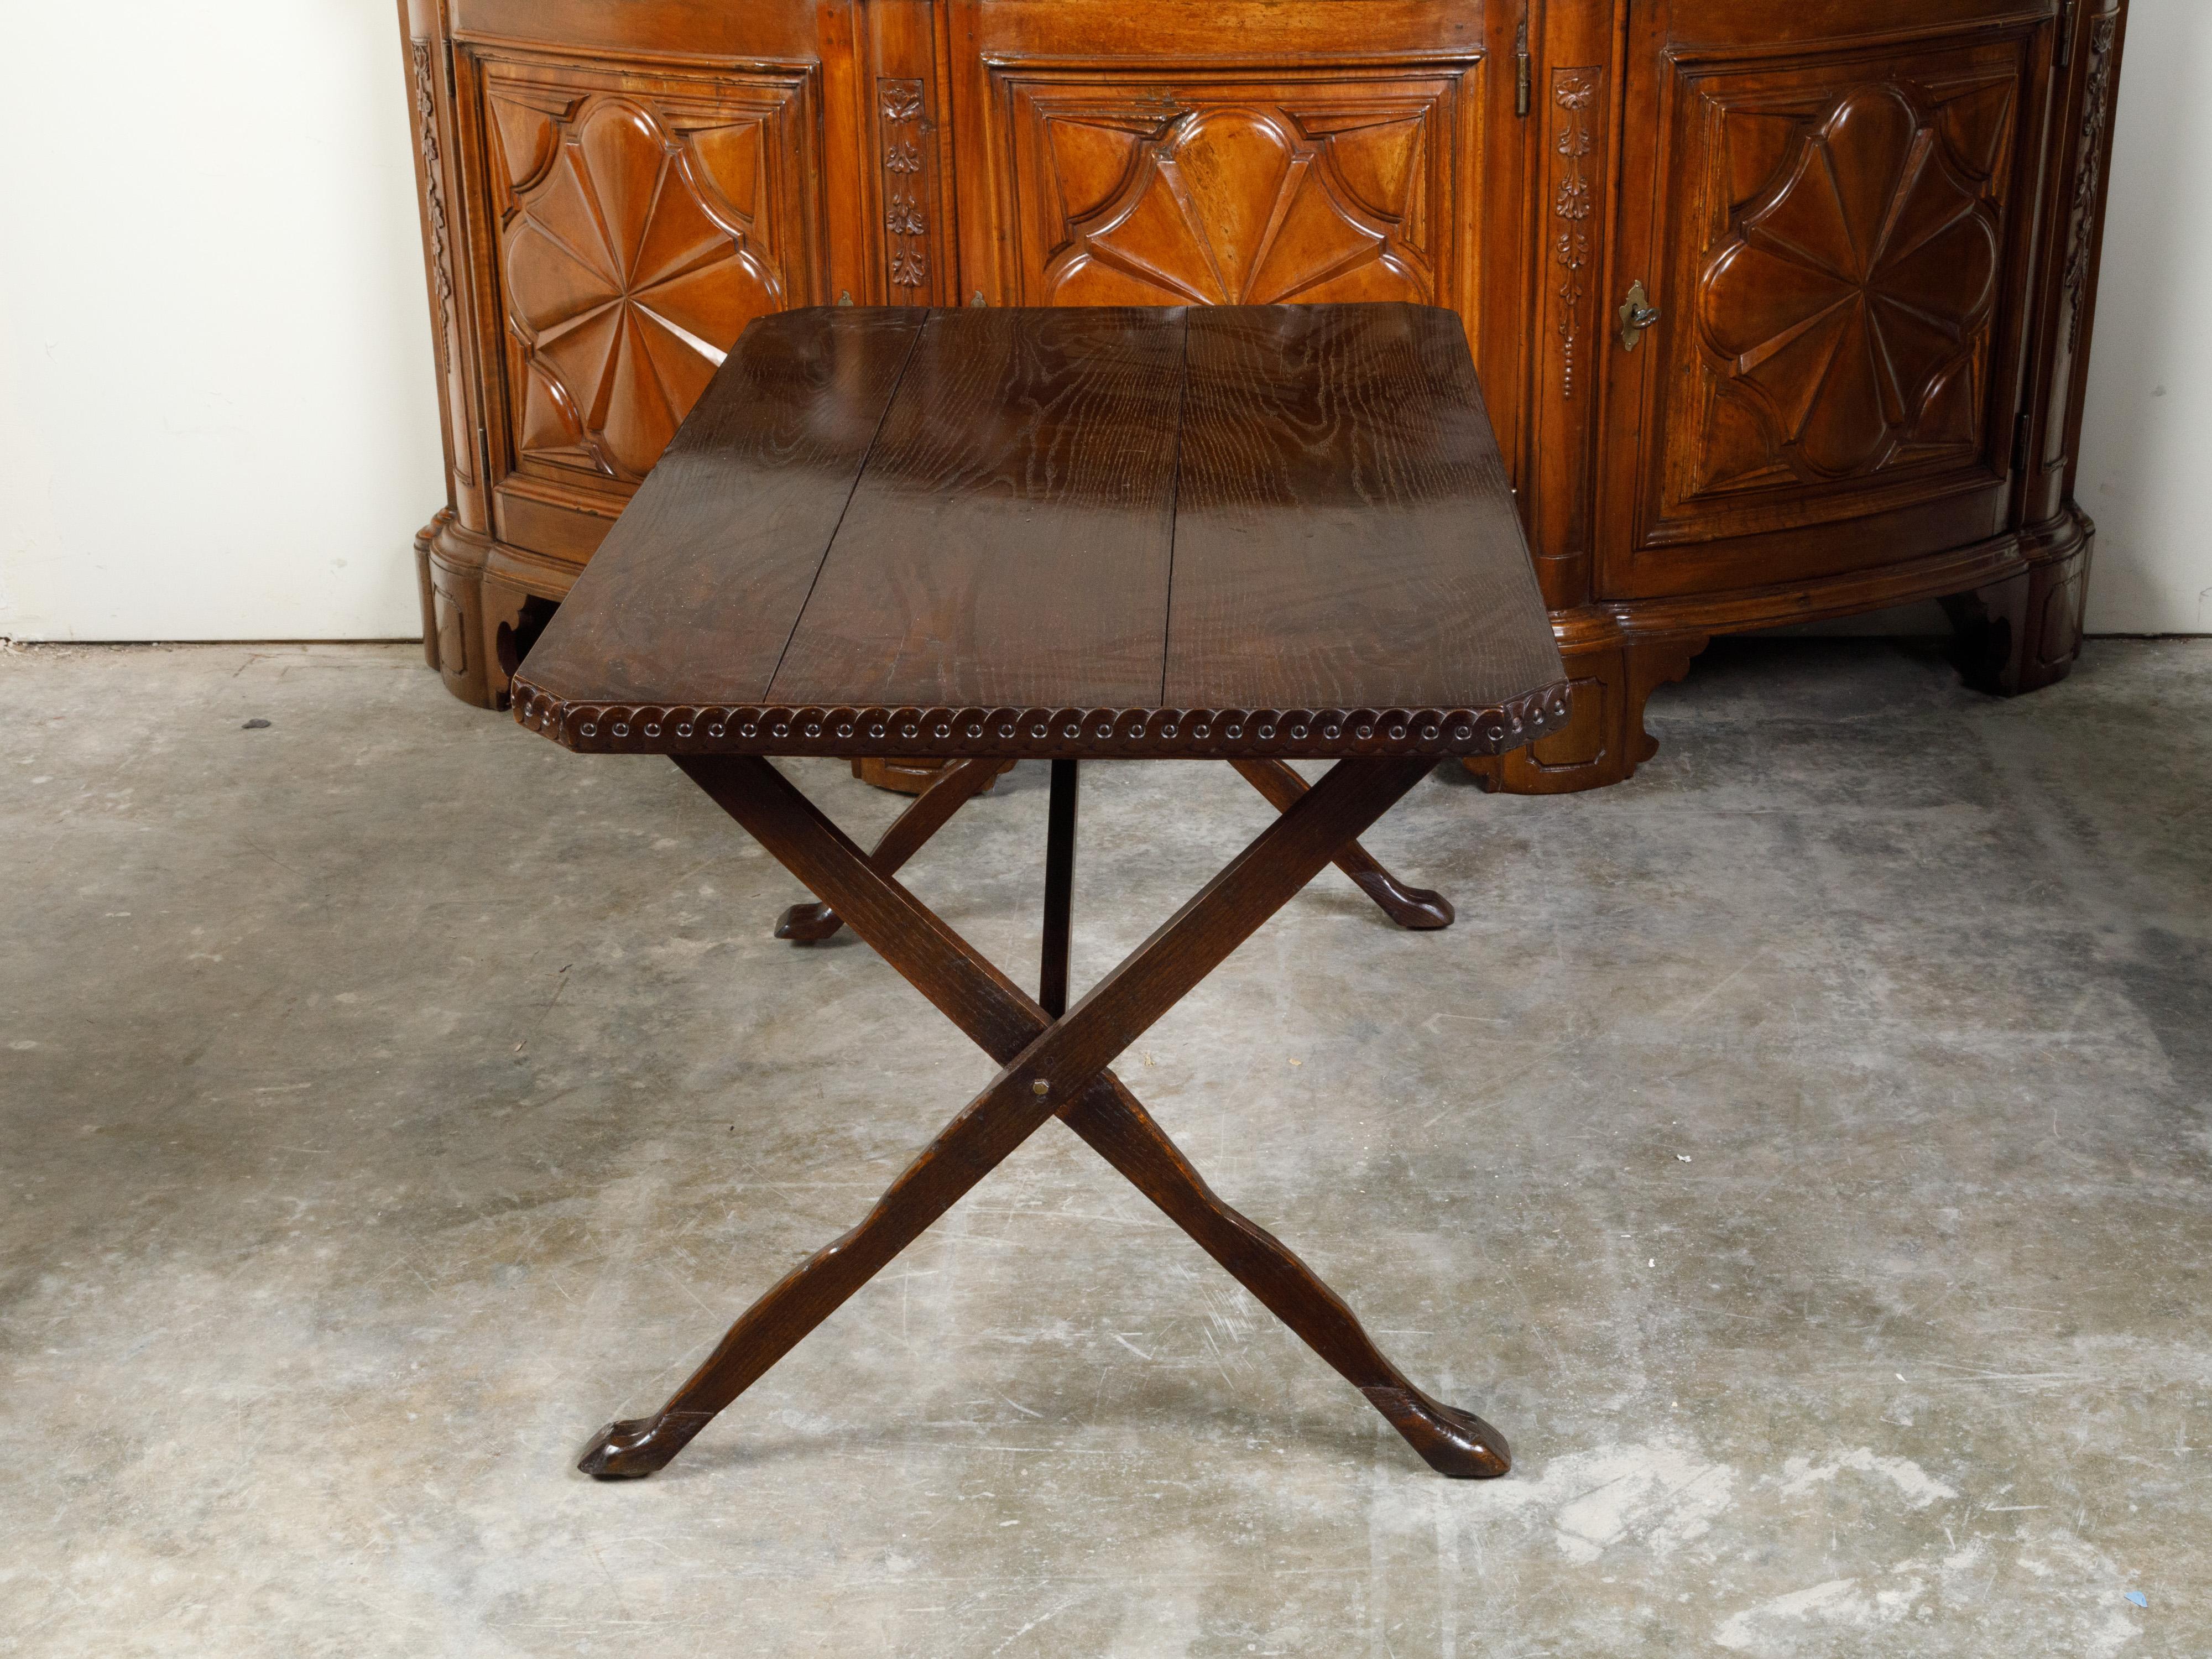 Italian 19th Century Oak Side Table with Carved Guilloche Frieze and X-Form Legs For Sale 5